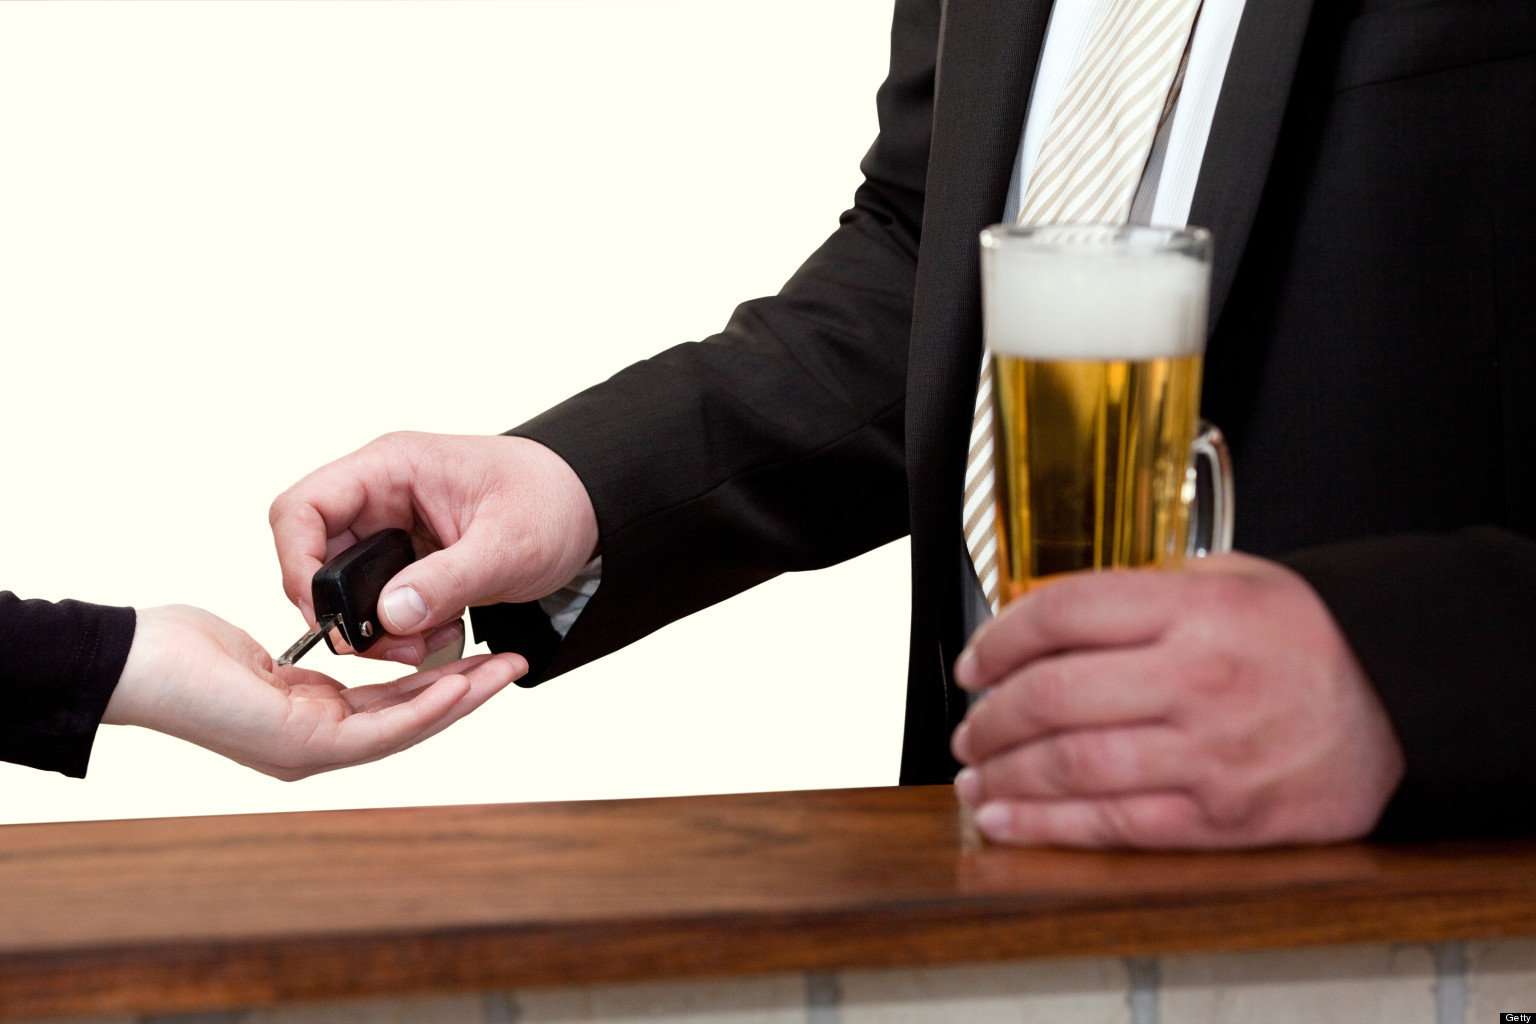 Designated Drivers: Study Shows Some Still Drink Alcohol ...